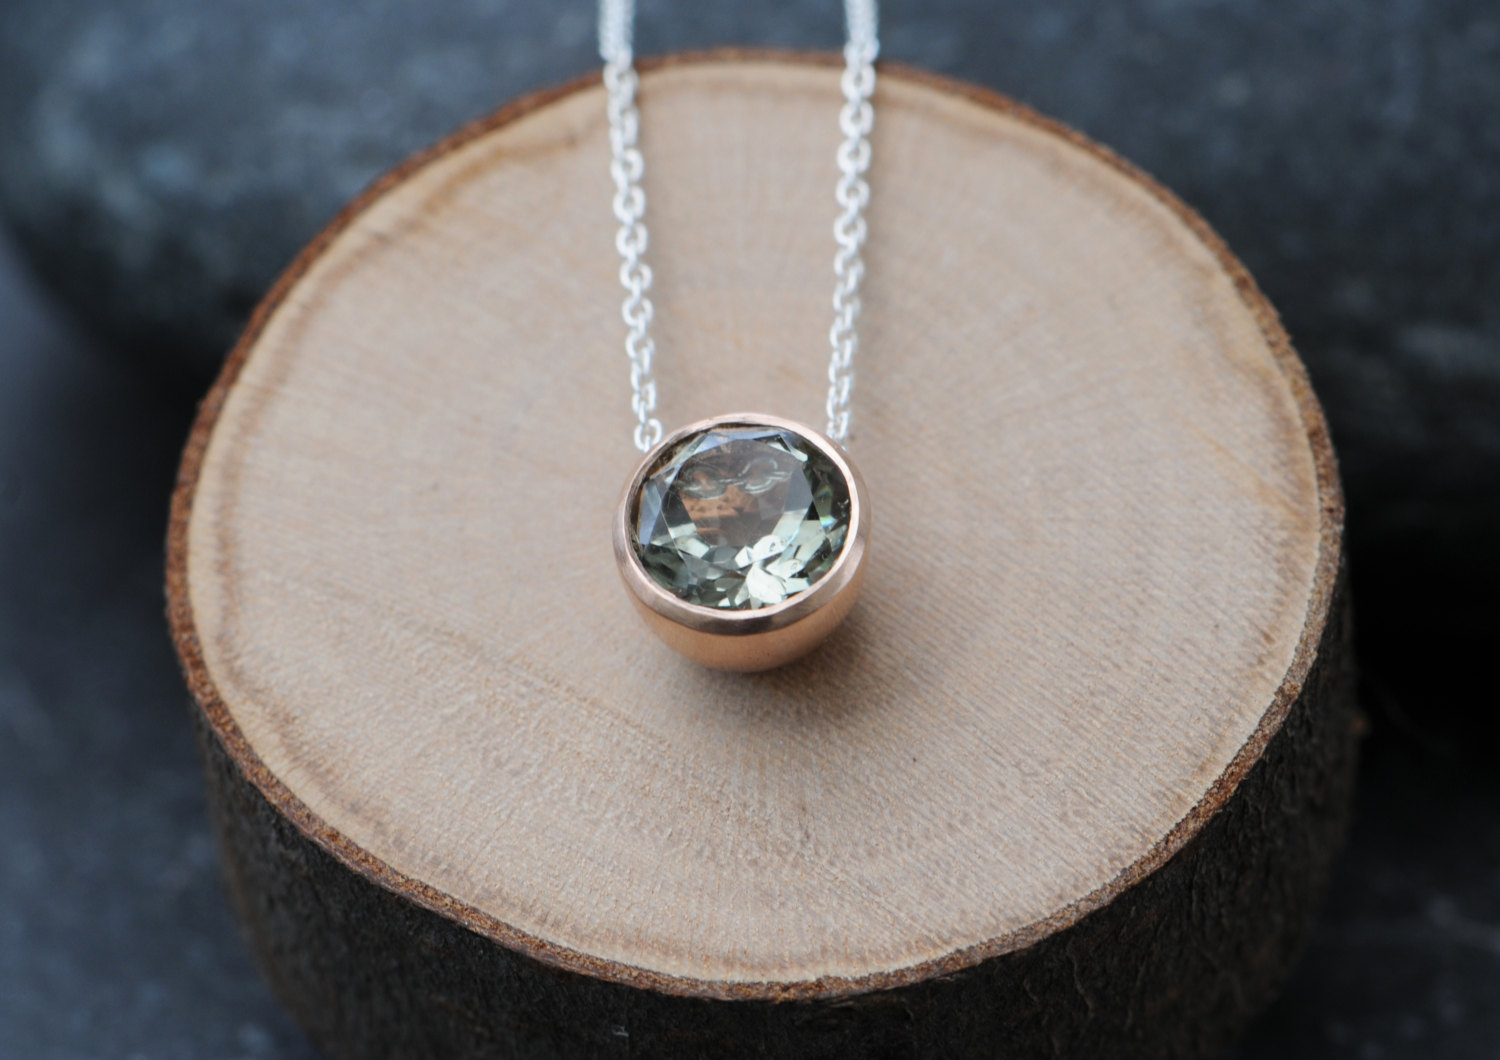 Lovely pale green amethyst, set in a satin finished 9K rose gold pendant on a silver chain. Designed and handmade by William White in Cornwall, UK